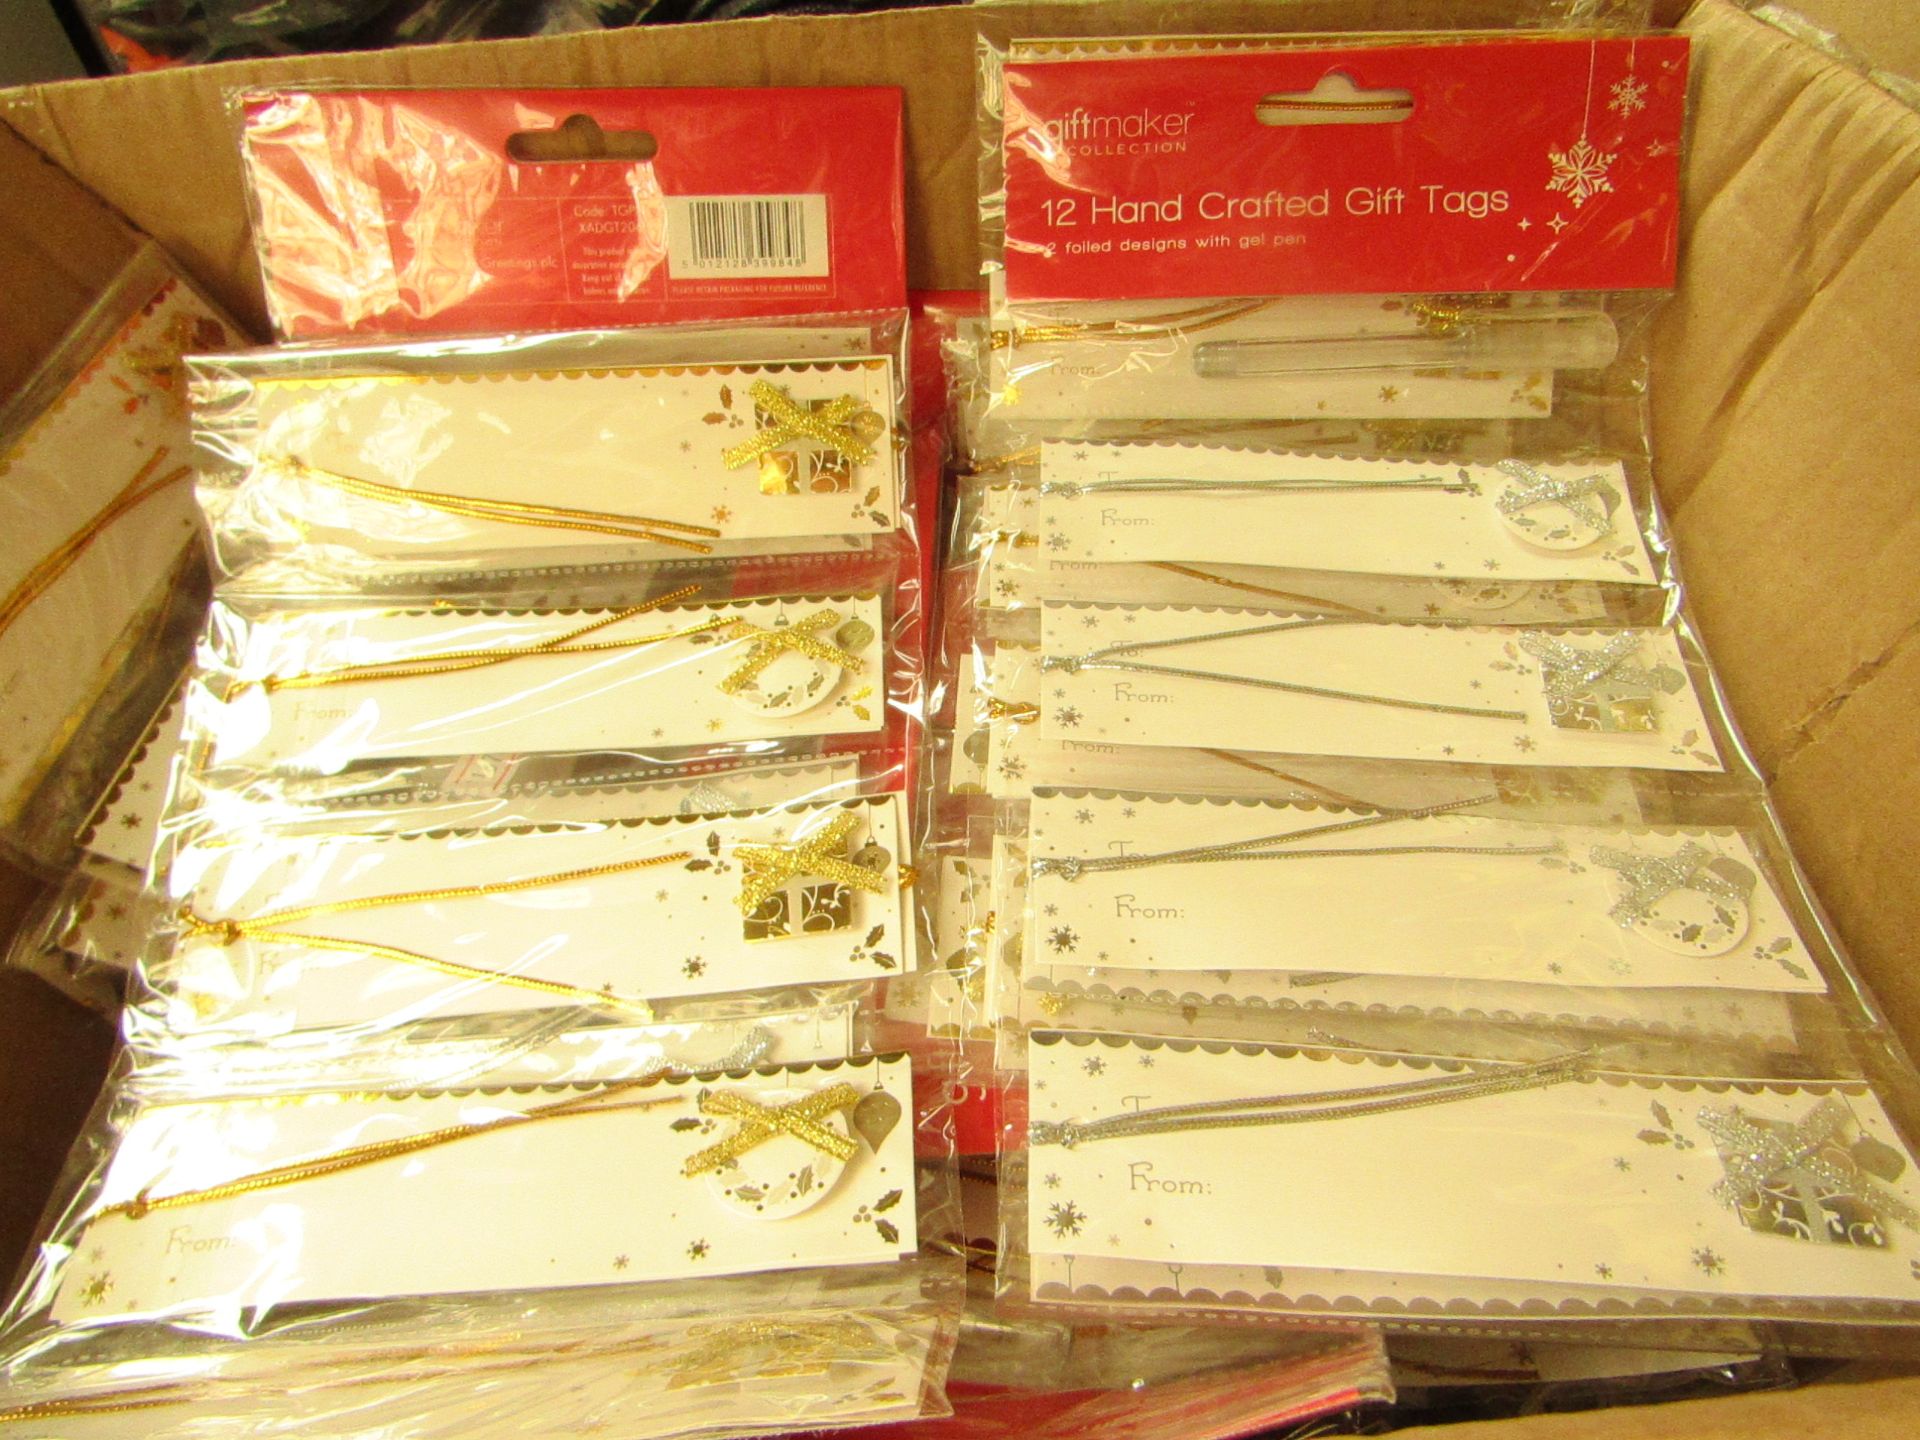 Approx 42 Packs of 12 Hand Crafted Gift Tags with gel Pens. New & Packaged